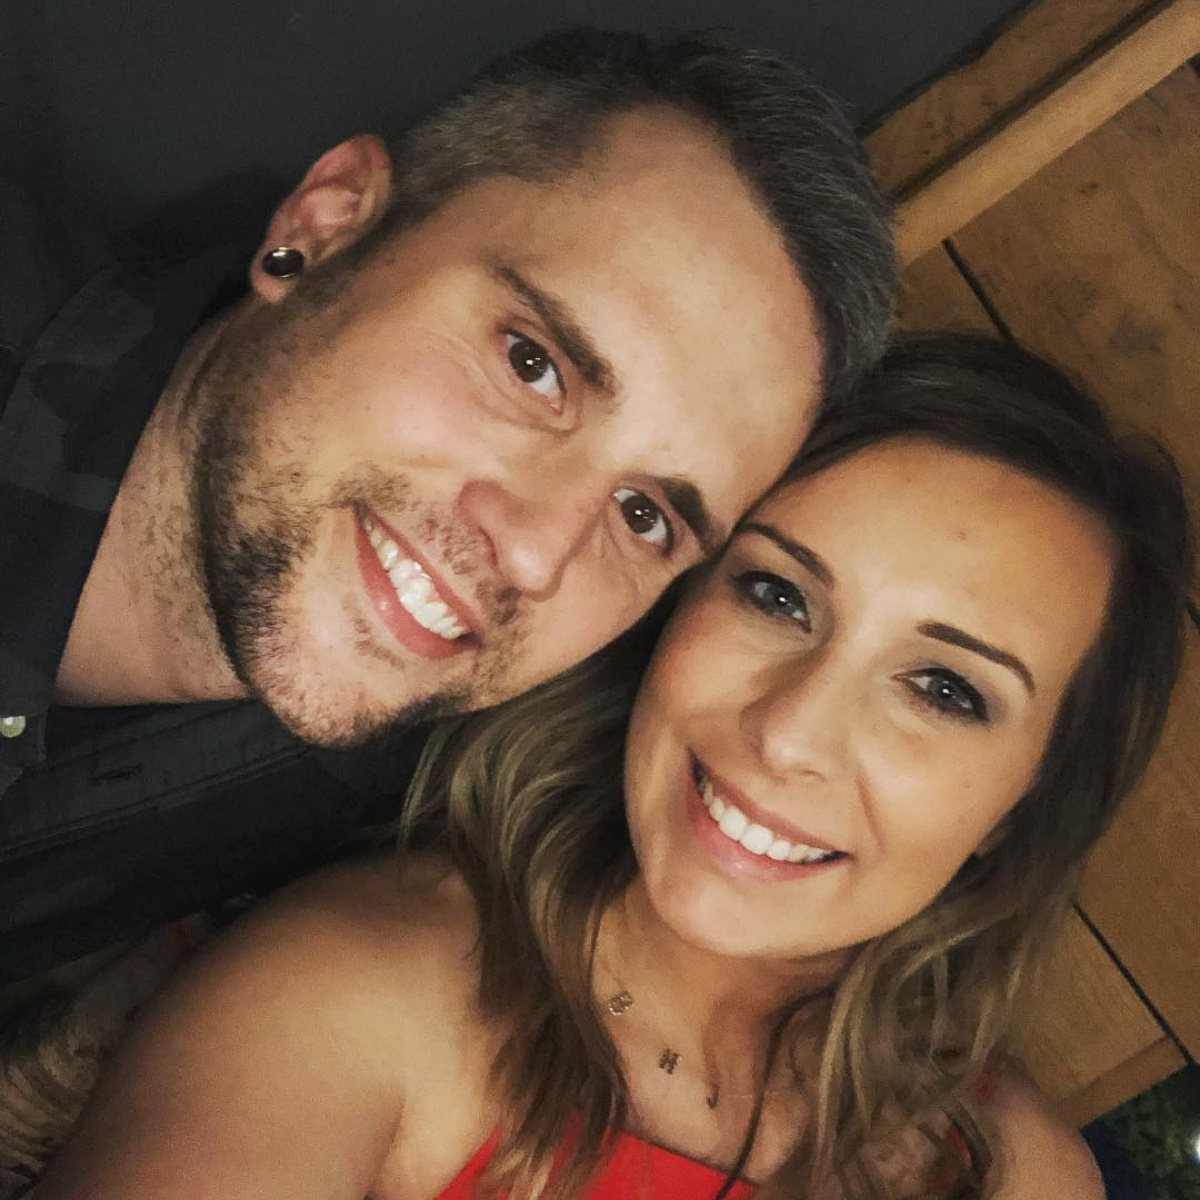 Teen Mom’s Ryan Edwards Arrested for Stalking and Violating Protection Order Amid Divorce – E! Online